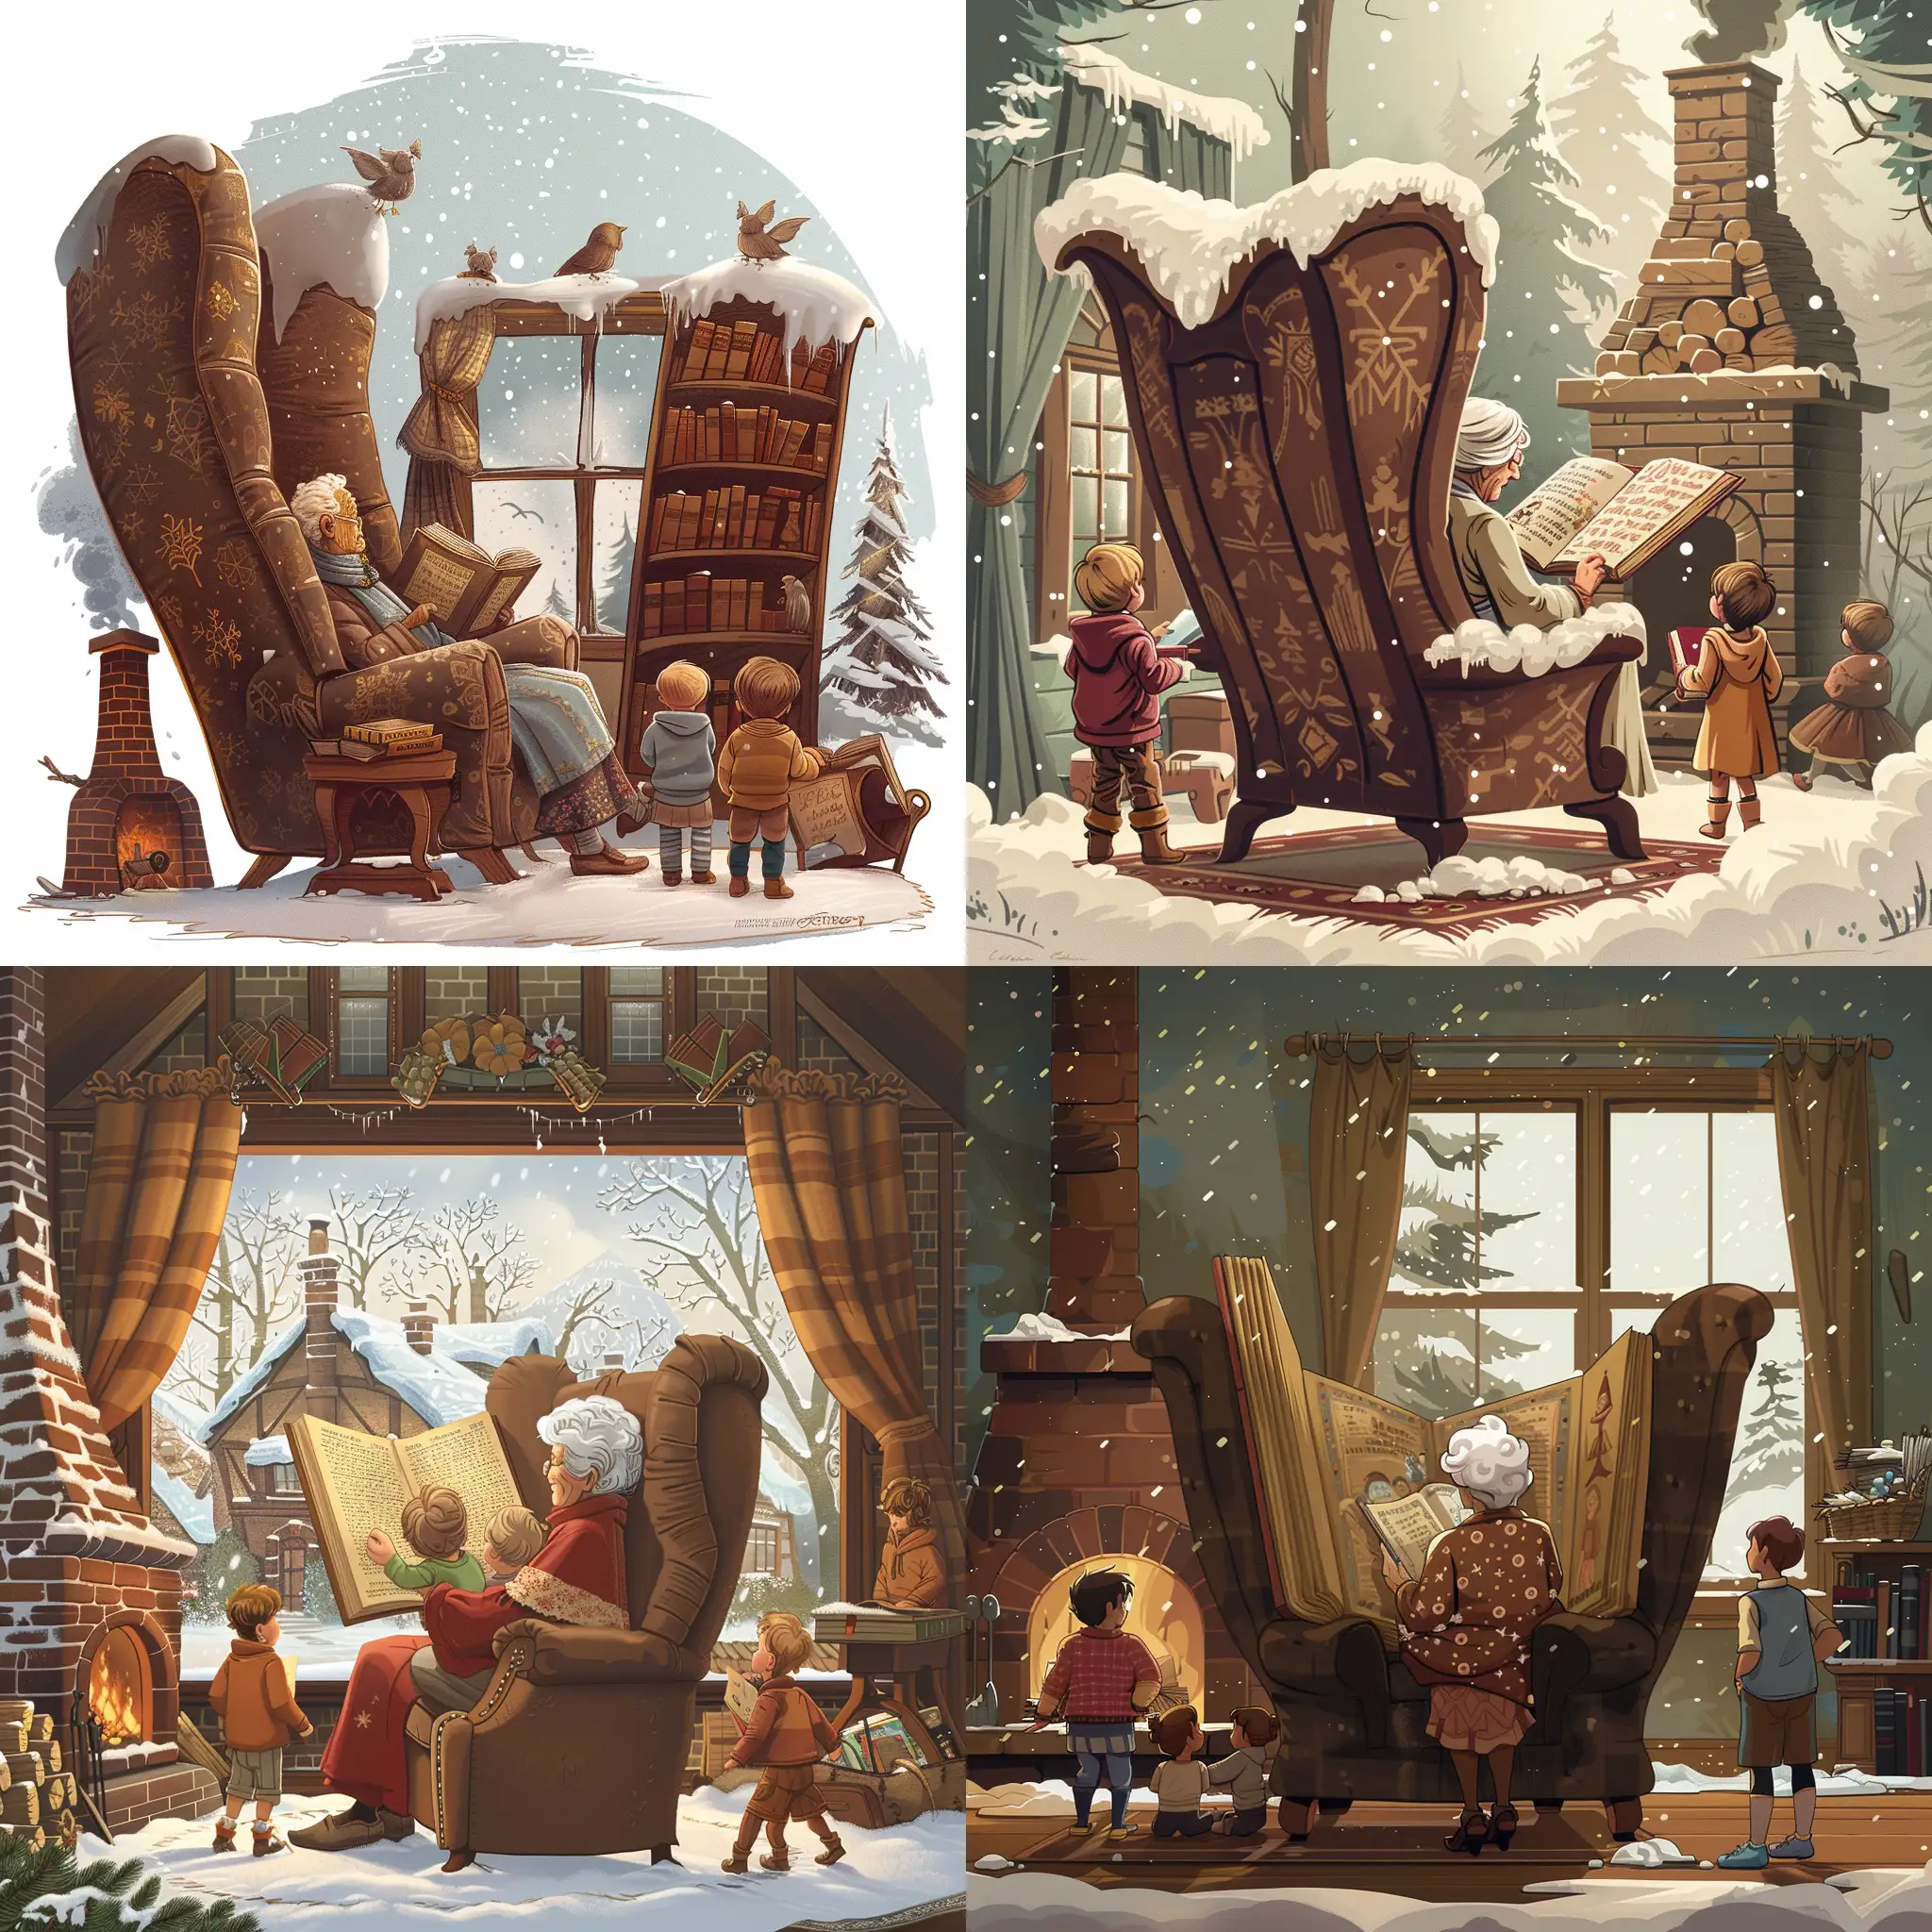 a grandmother sitting in an big wing chair reading to childen from a big book. There is also a chimney and a window where you can see that´s its snowing outside. the children are only seen from the back. Its a coming picture in the style of disney